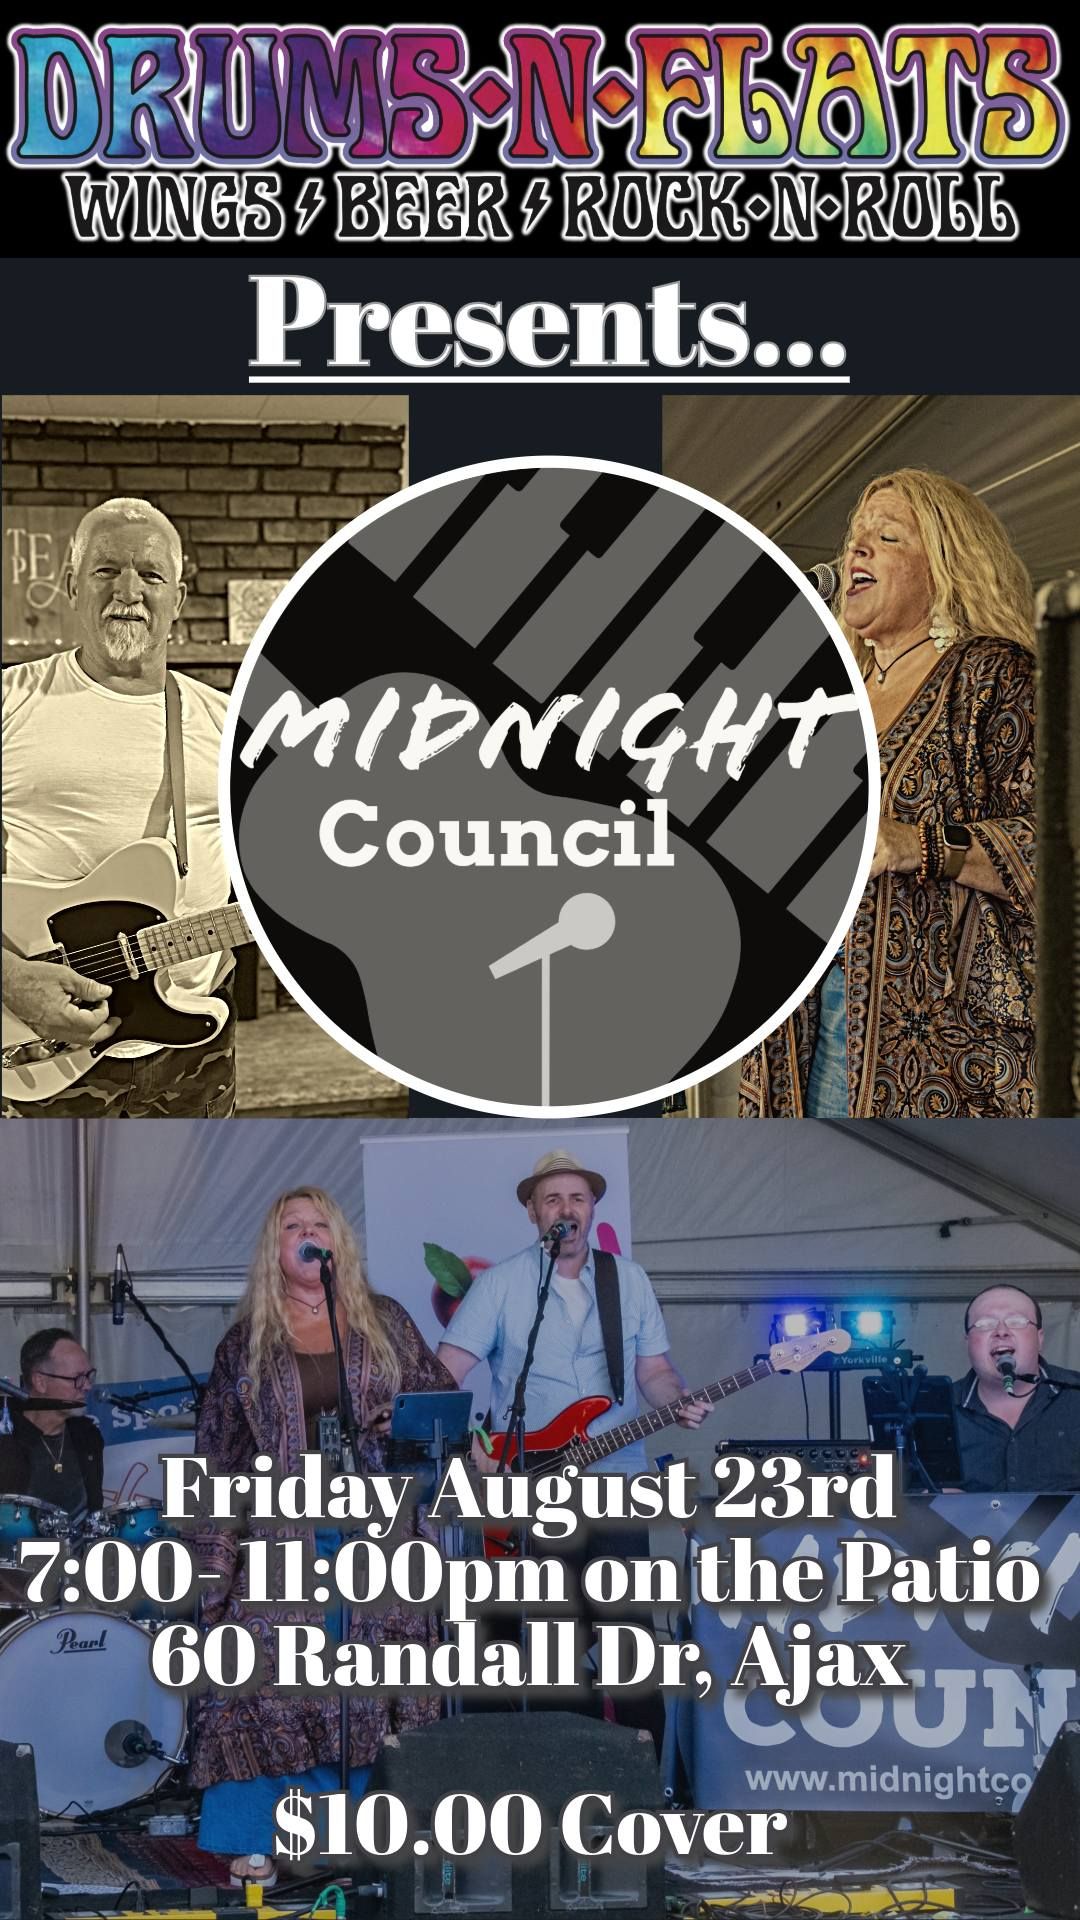 Midnight Council at Drums N Flats Patio